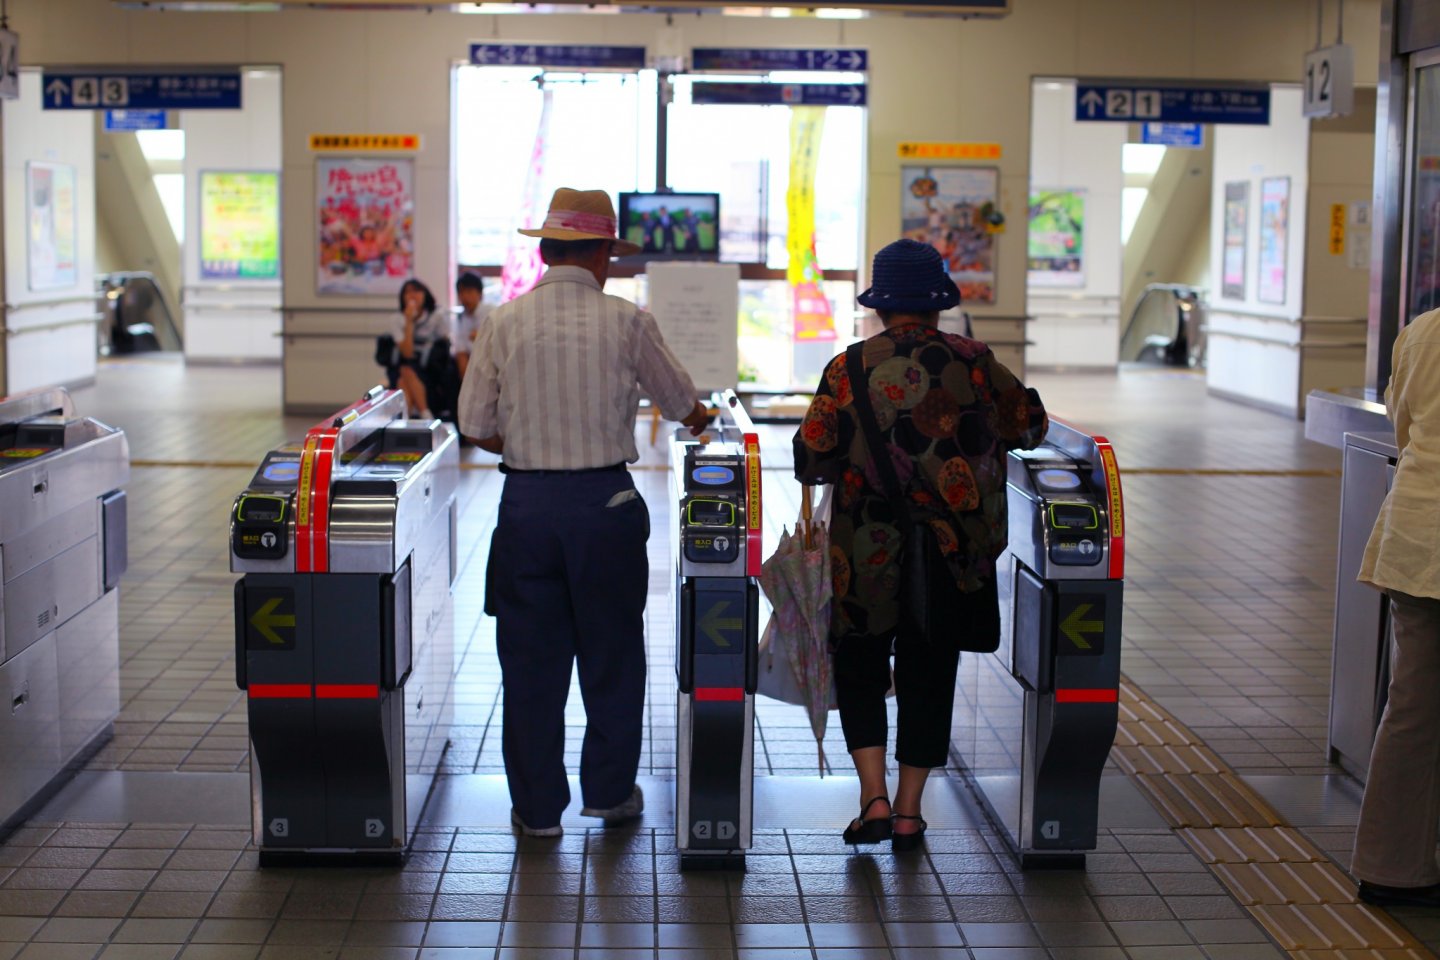 Heading through the ticket barriers